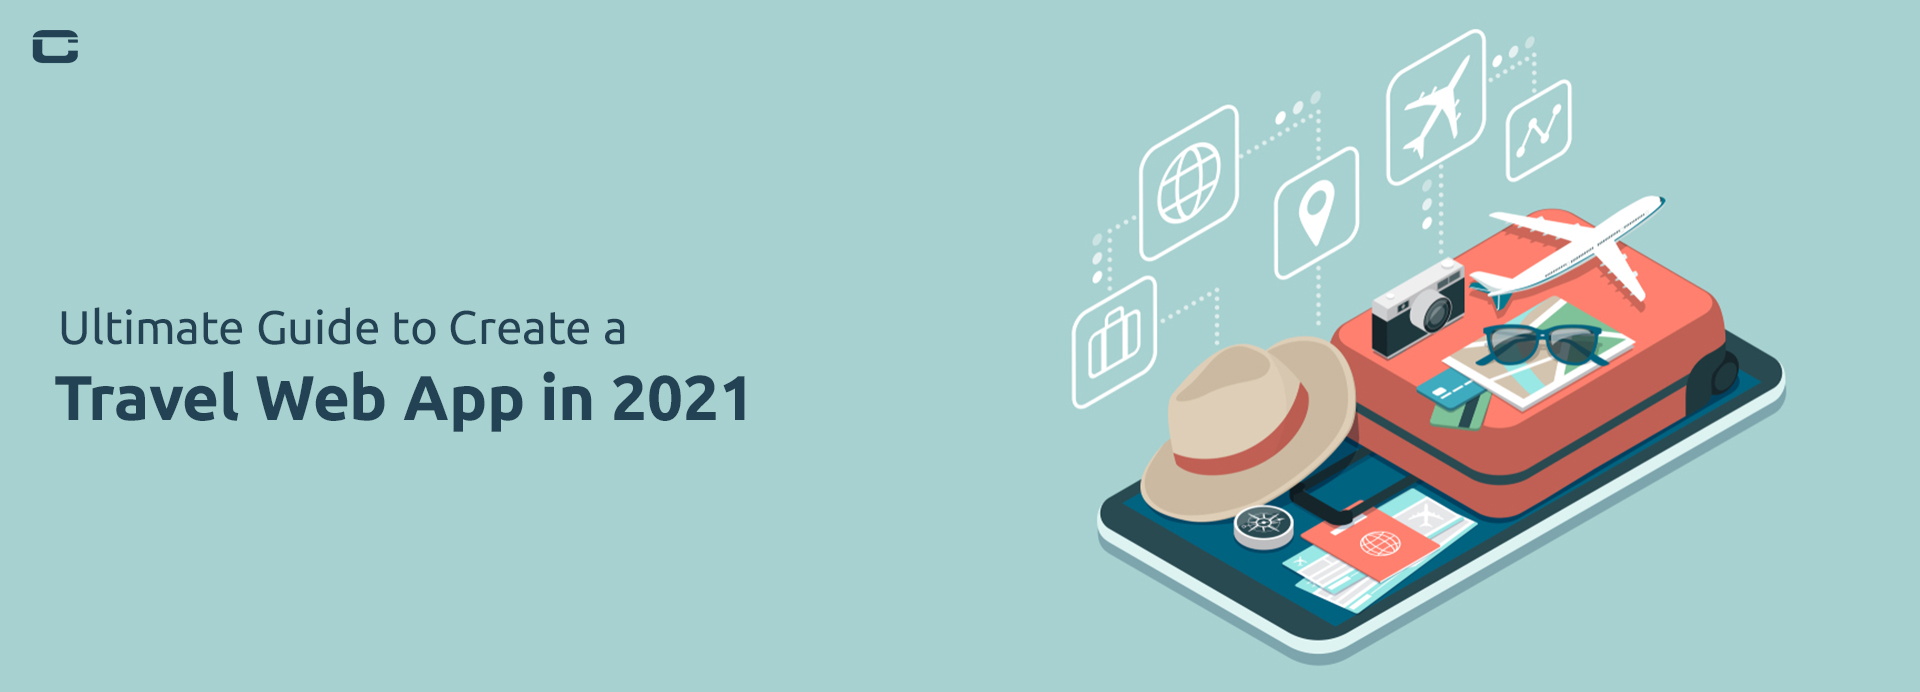 Ultimate Guide to Create a Travel Web App in 2021